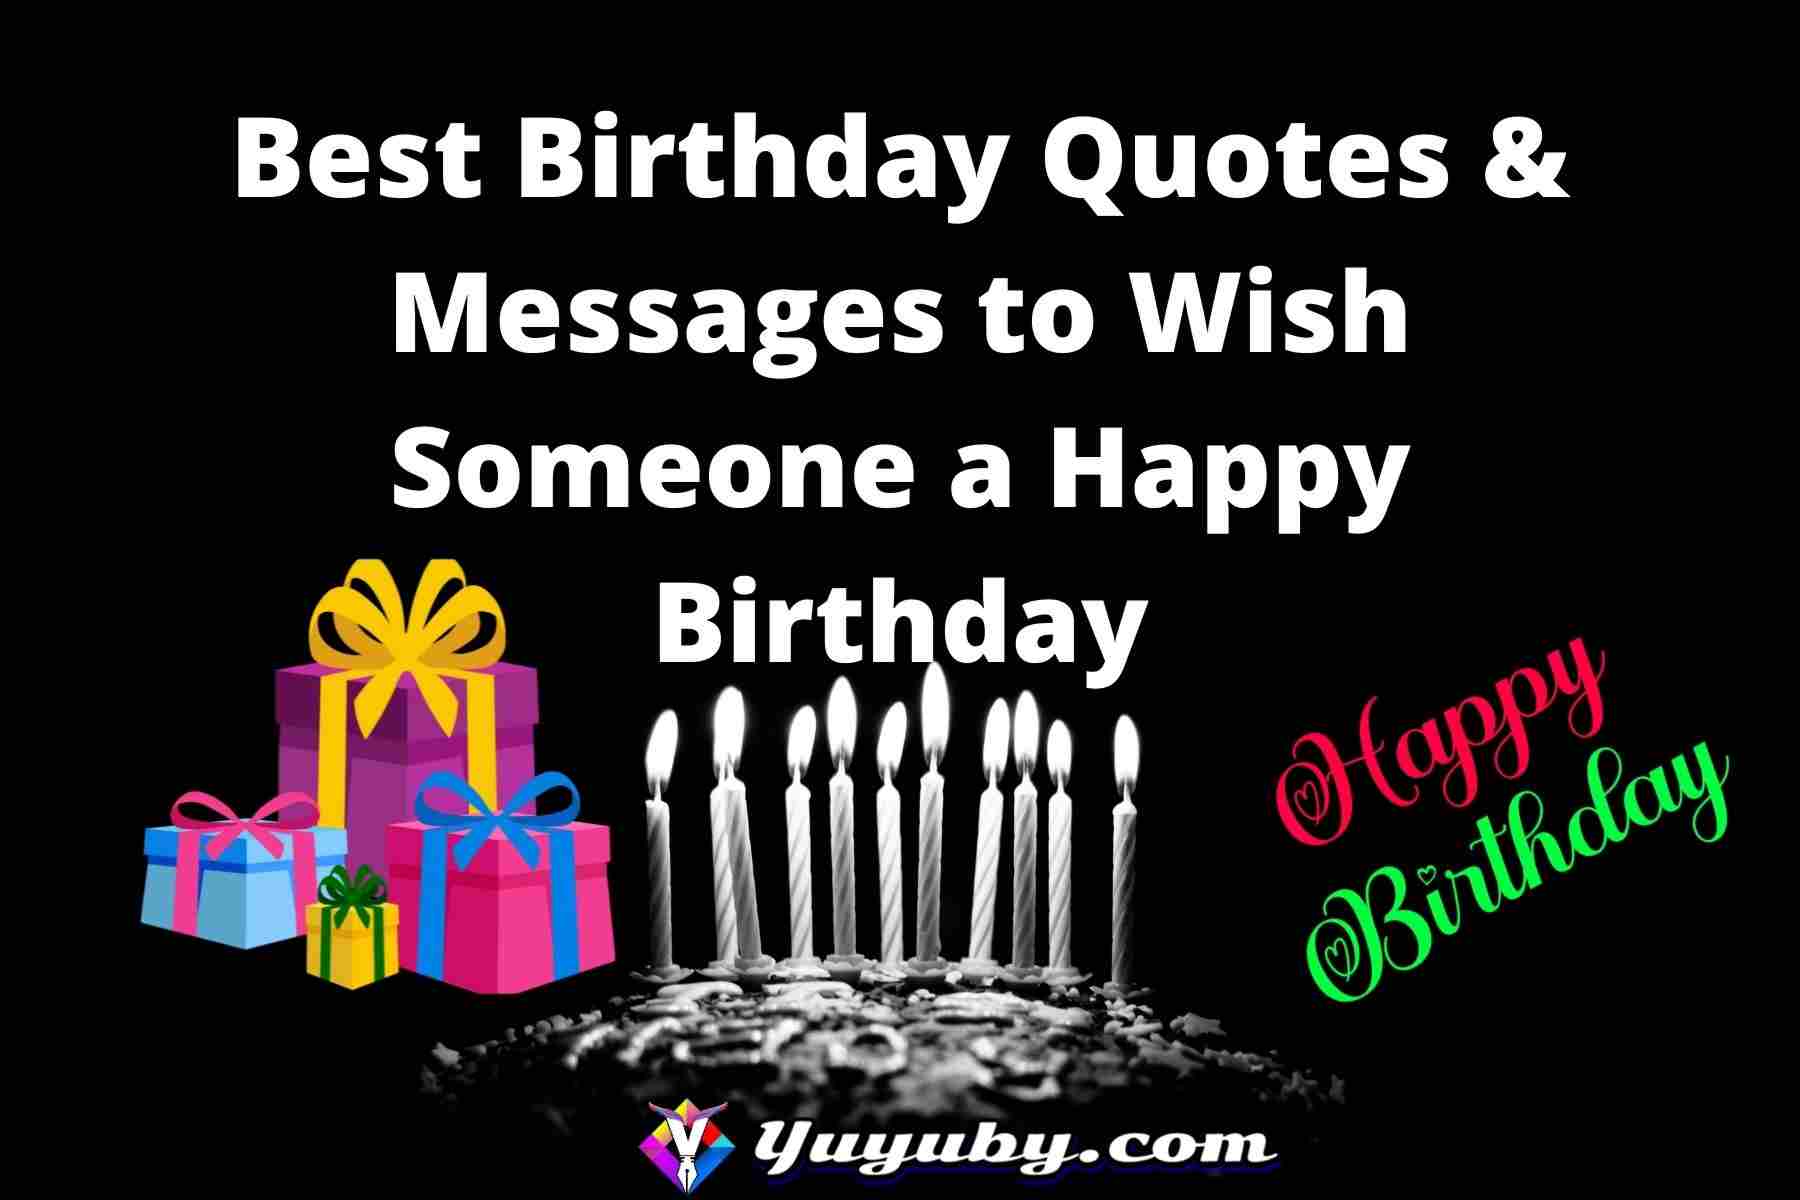 Best Birthday Quotes & Messages to Wish Someone a Happy Birthday